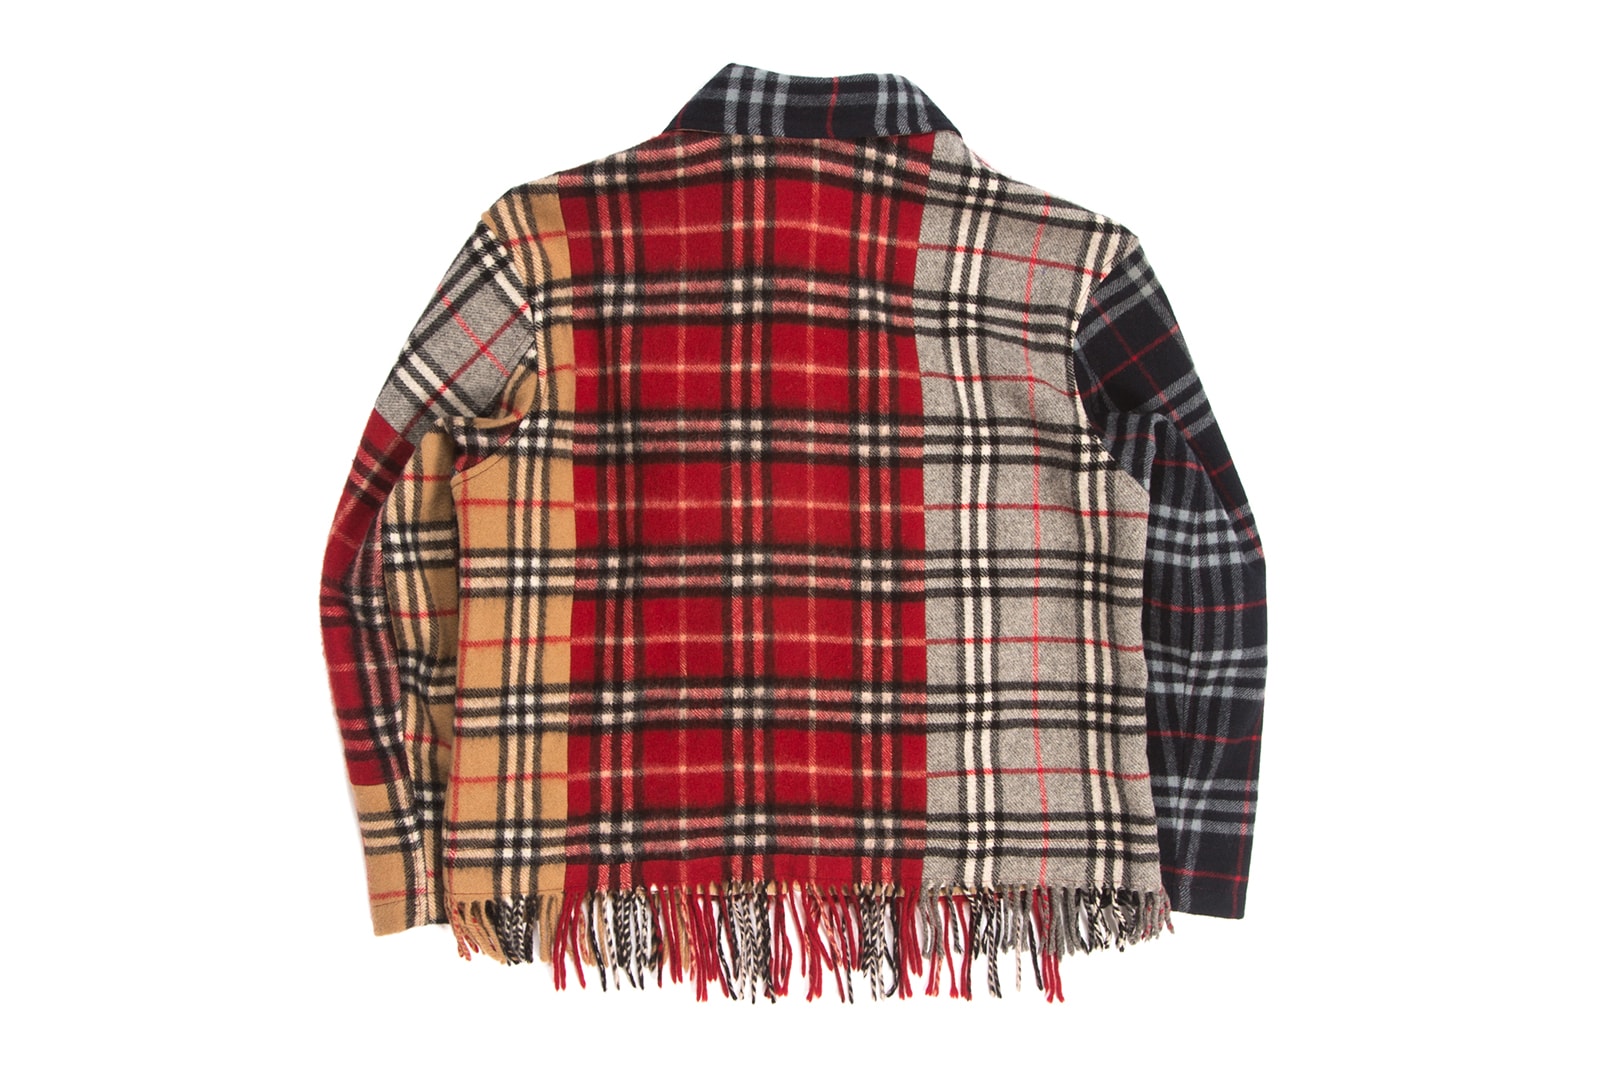 clothsurgeon Burberry Scarves Jacket Reconstruct Project